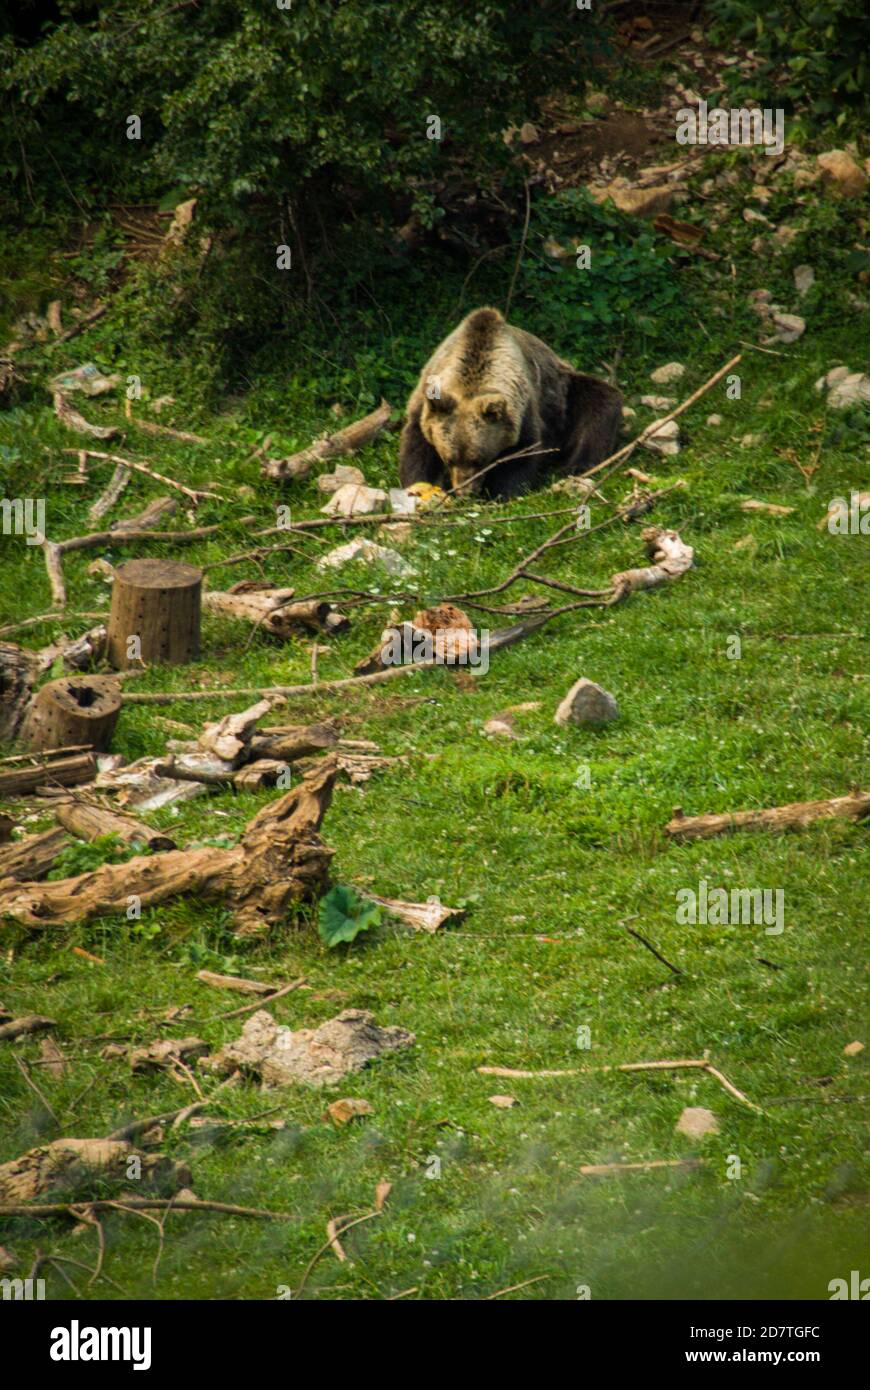 Huge brown bear eating in Kuterevo bears sanctuary in Croatia, protection of the wild animals Stock Photo